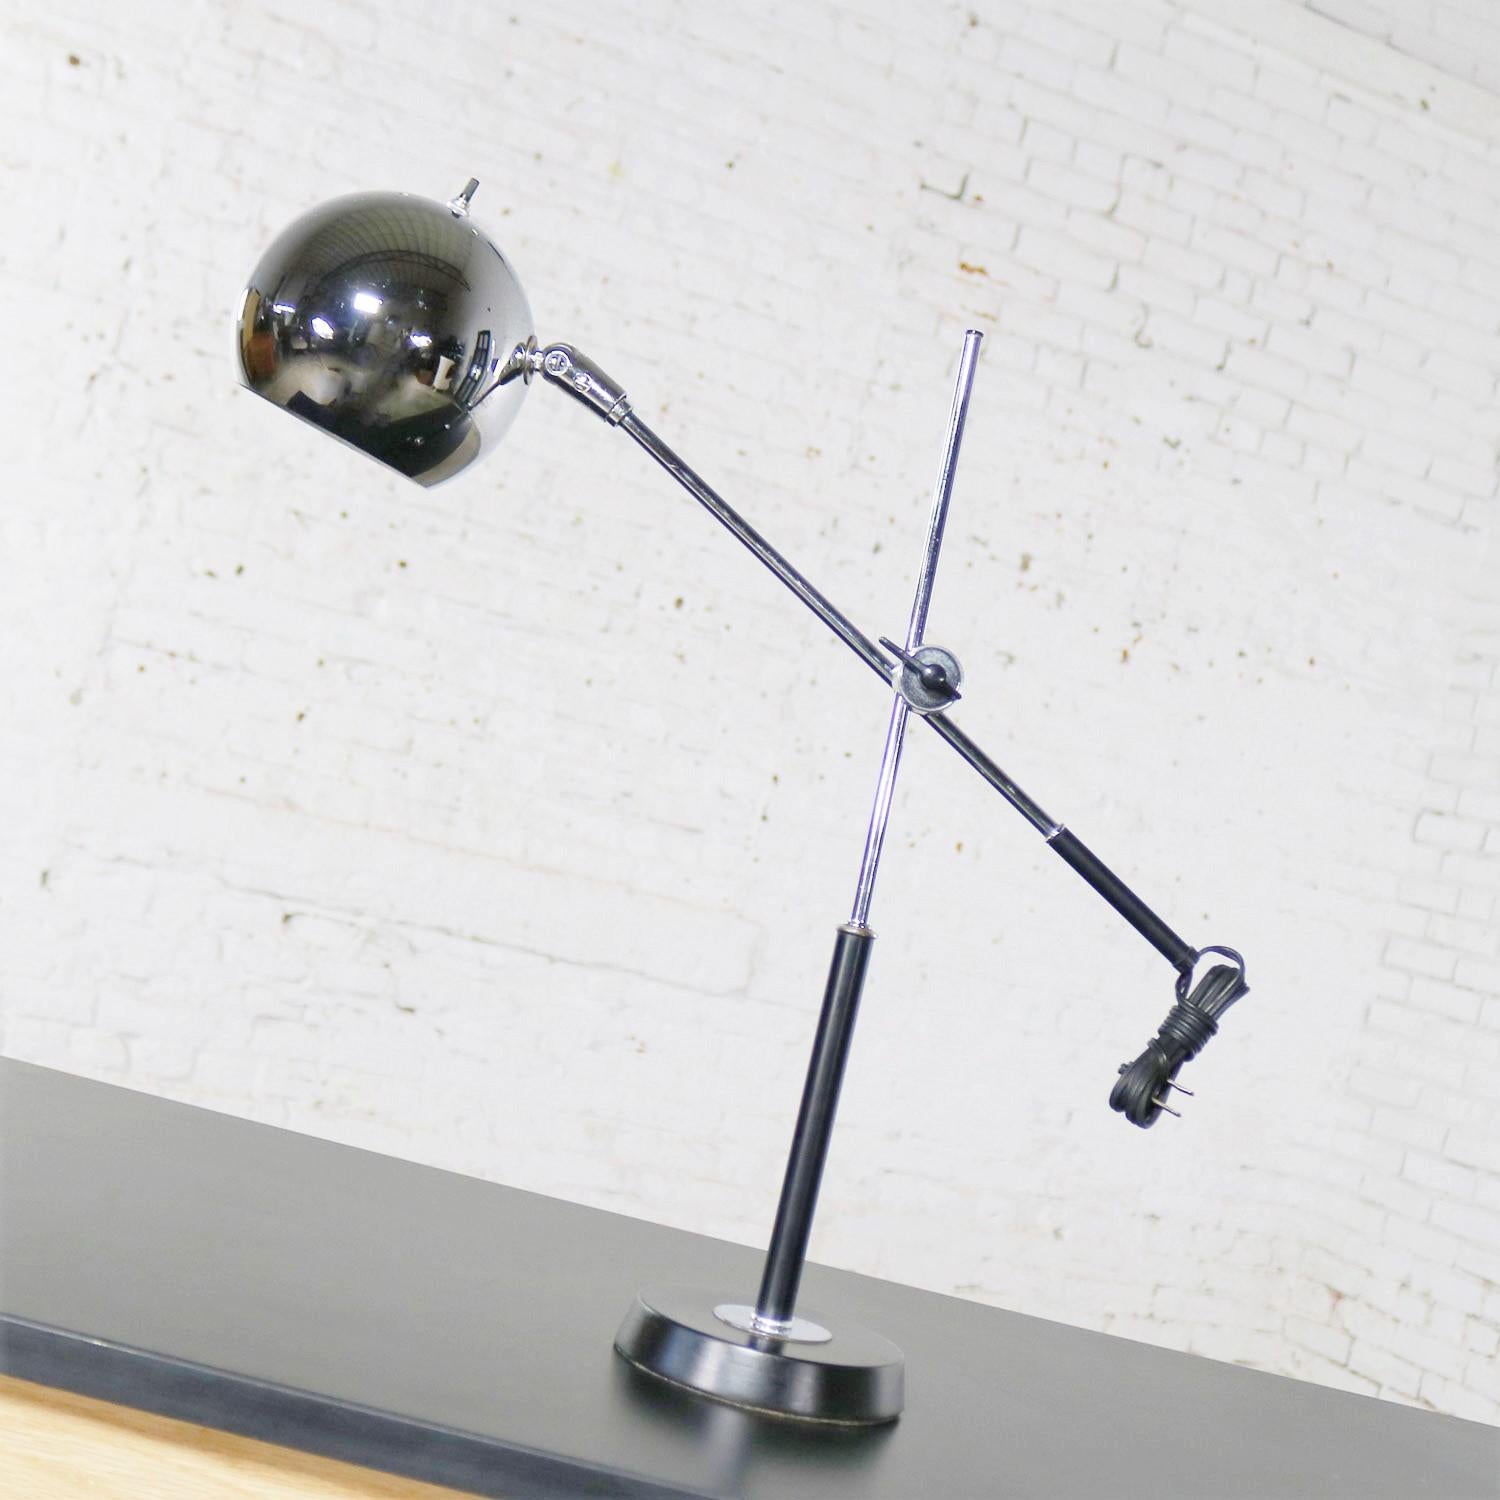 A Mid-Century Modern Classic ball or orb task, desk, or table lamp in chrome and black that is attributed to Robert Sonneman. It is in wonderful vintage condition and ready to use. Please see photos, circa 1970s.

This Classic Mid-Century Modern